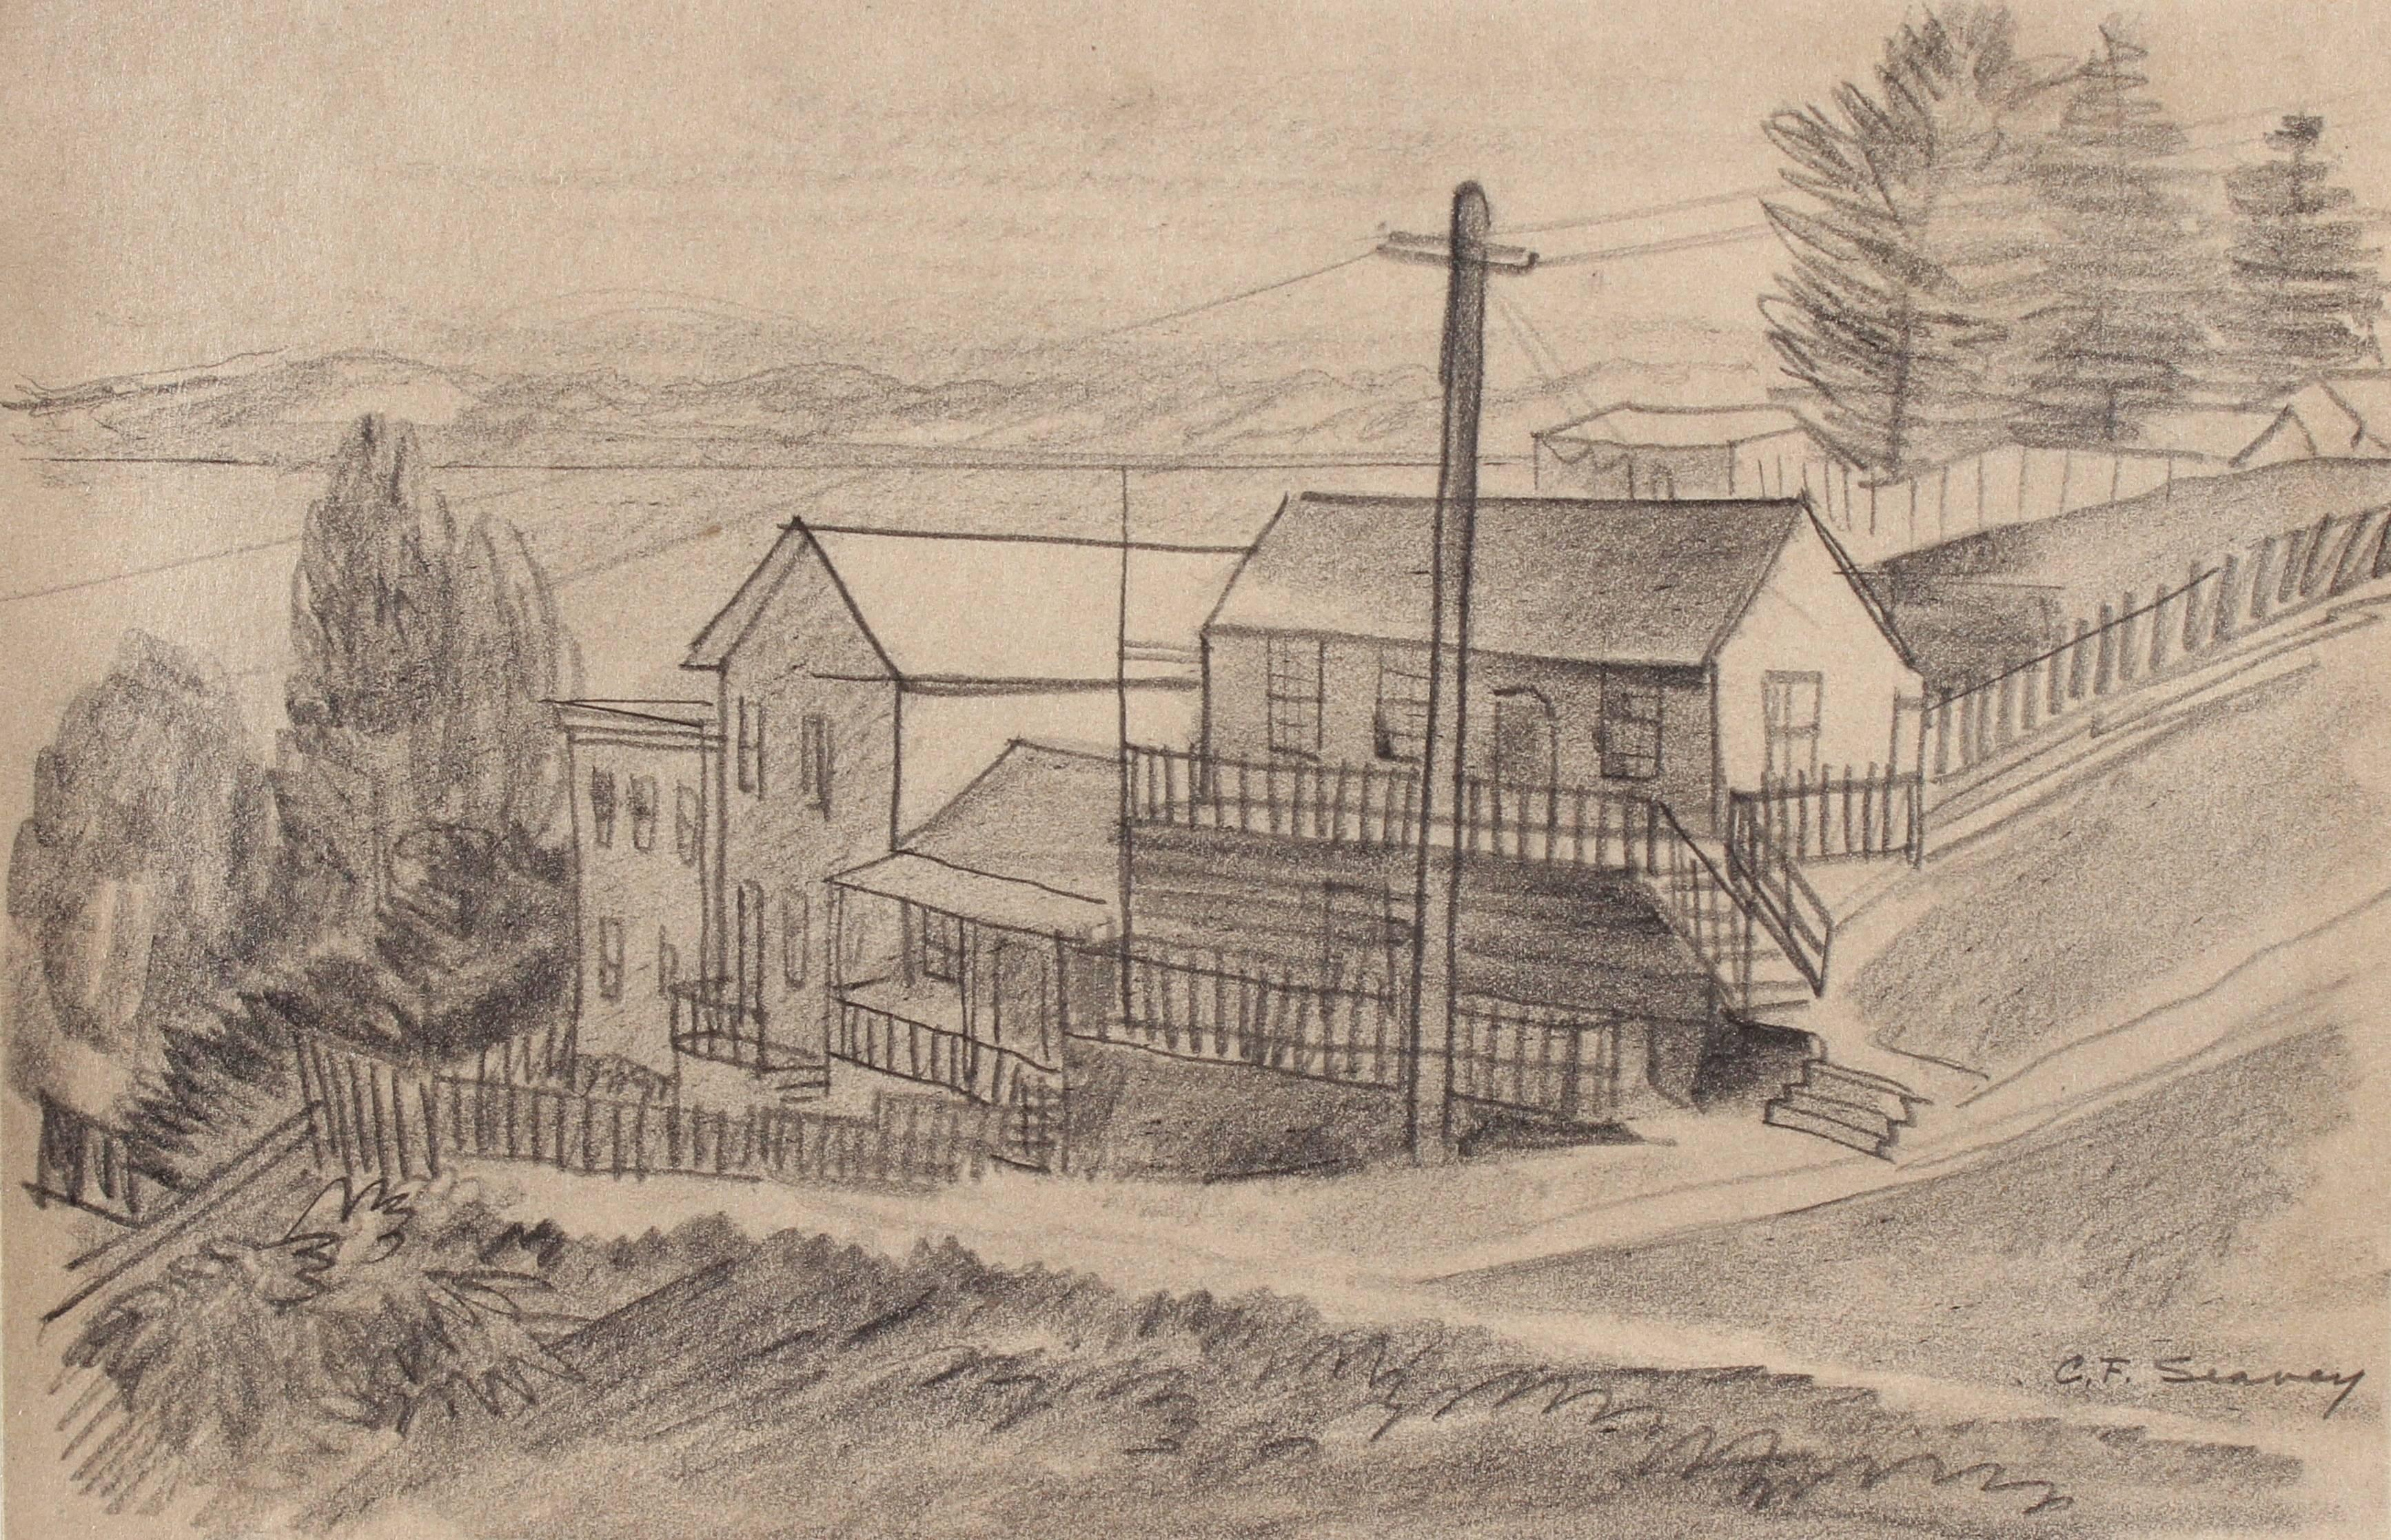 Clyde F. Seavey Sr. Landscape Art - San Francisco Neighborhood by the Bay, Graphite Drawing, 1938